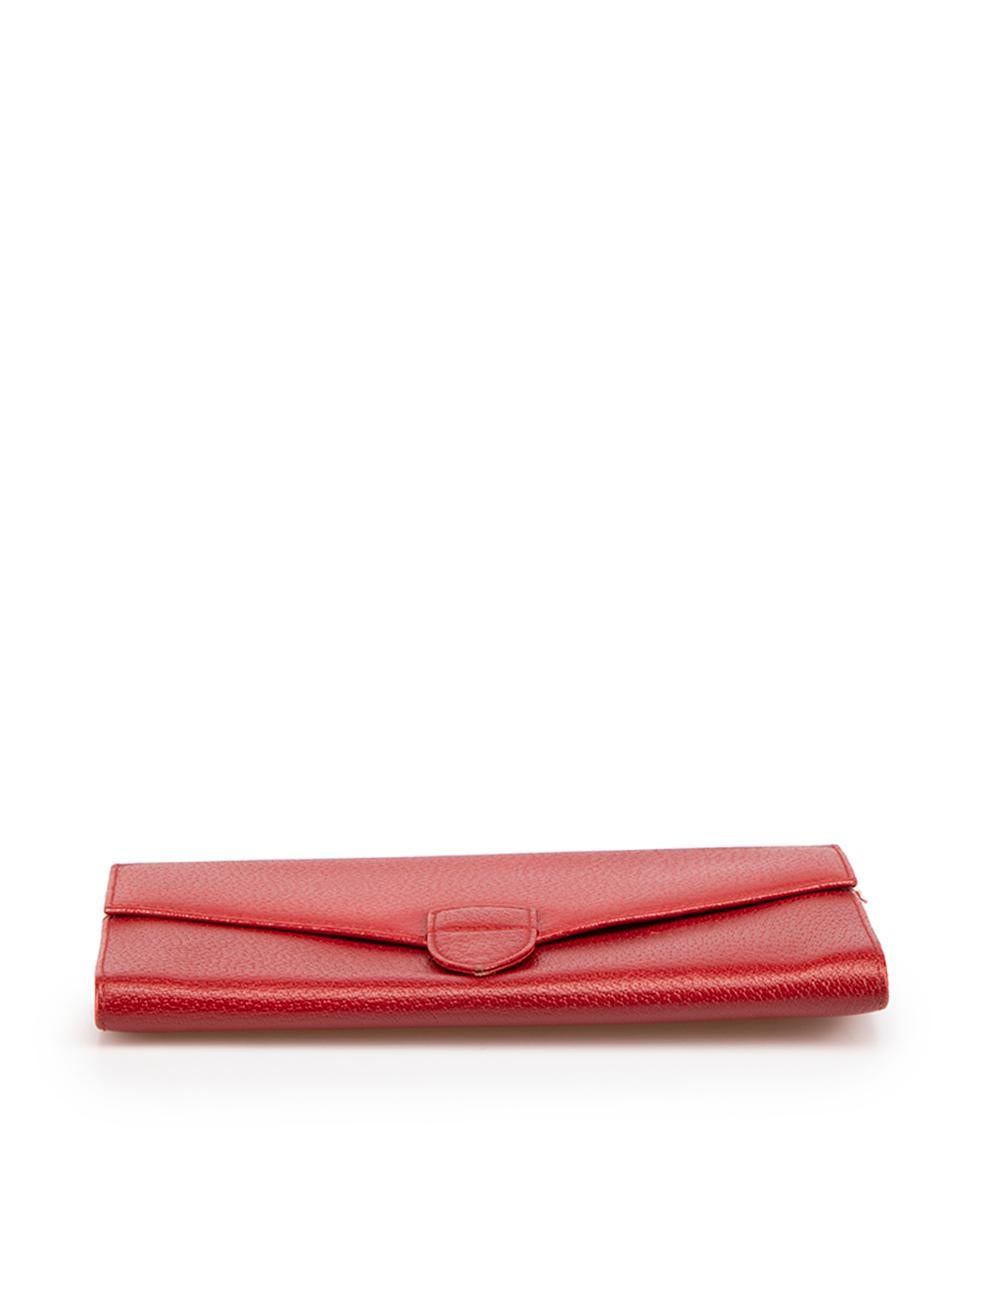 Women's Smythson Red Leather Bifold Travel Wallet For Sale